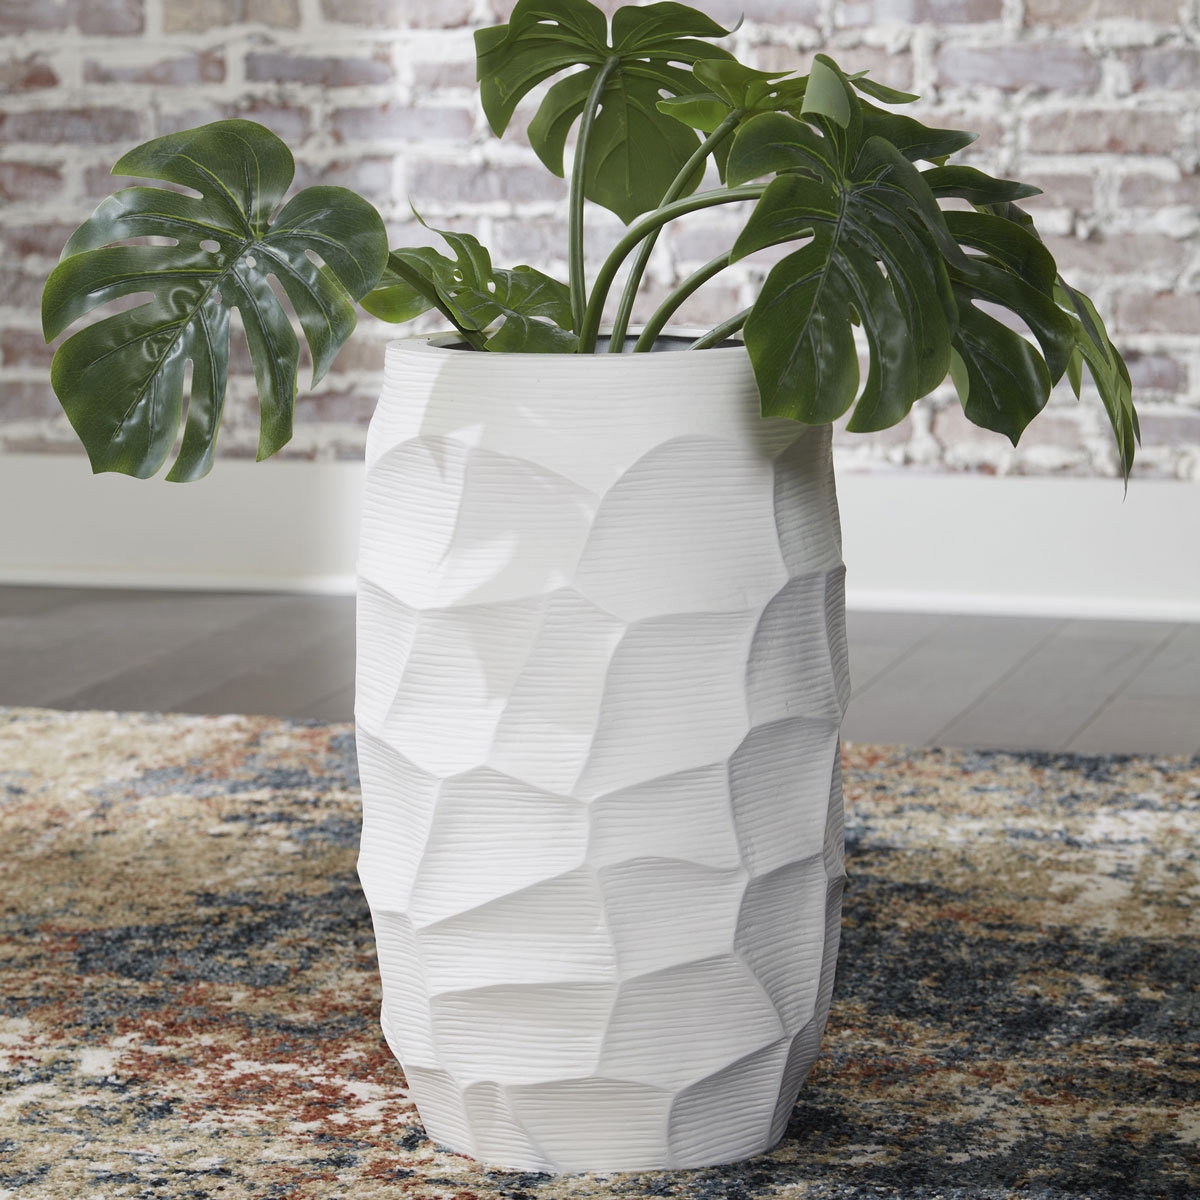 Picture of PATENLEIGH WHT TEXTURED VASE